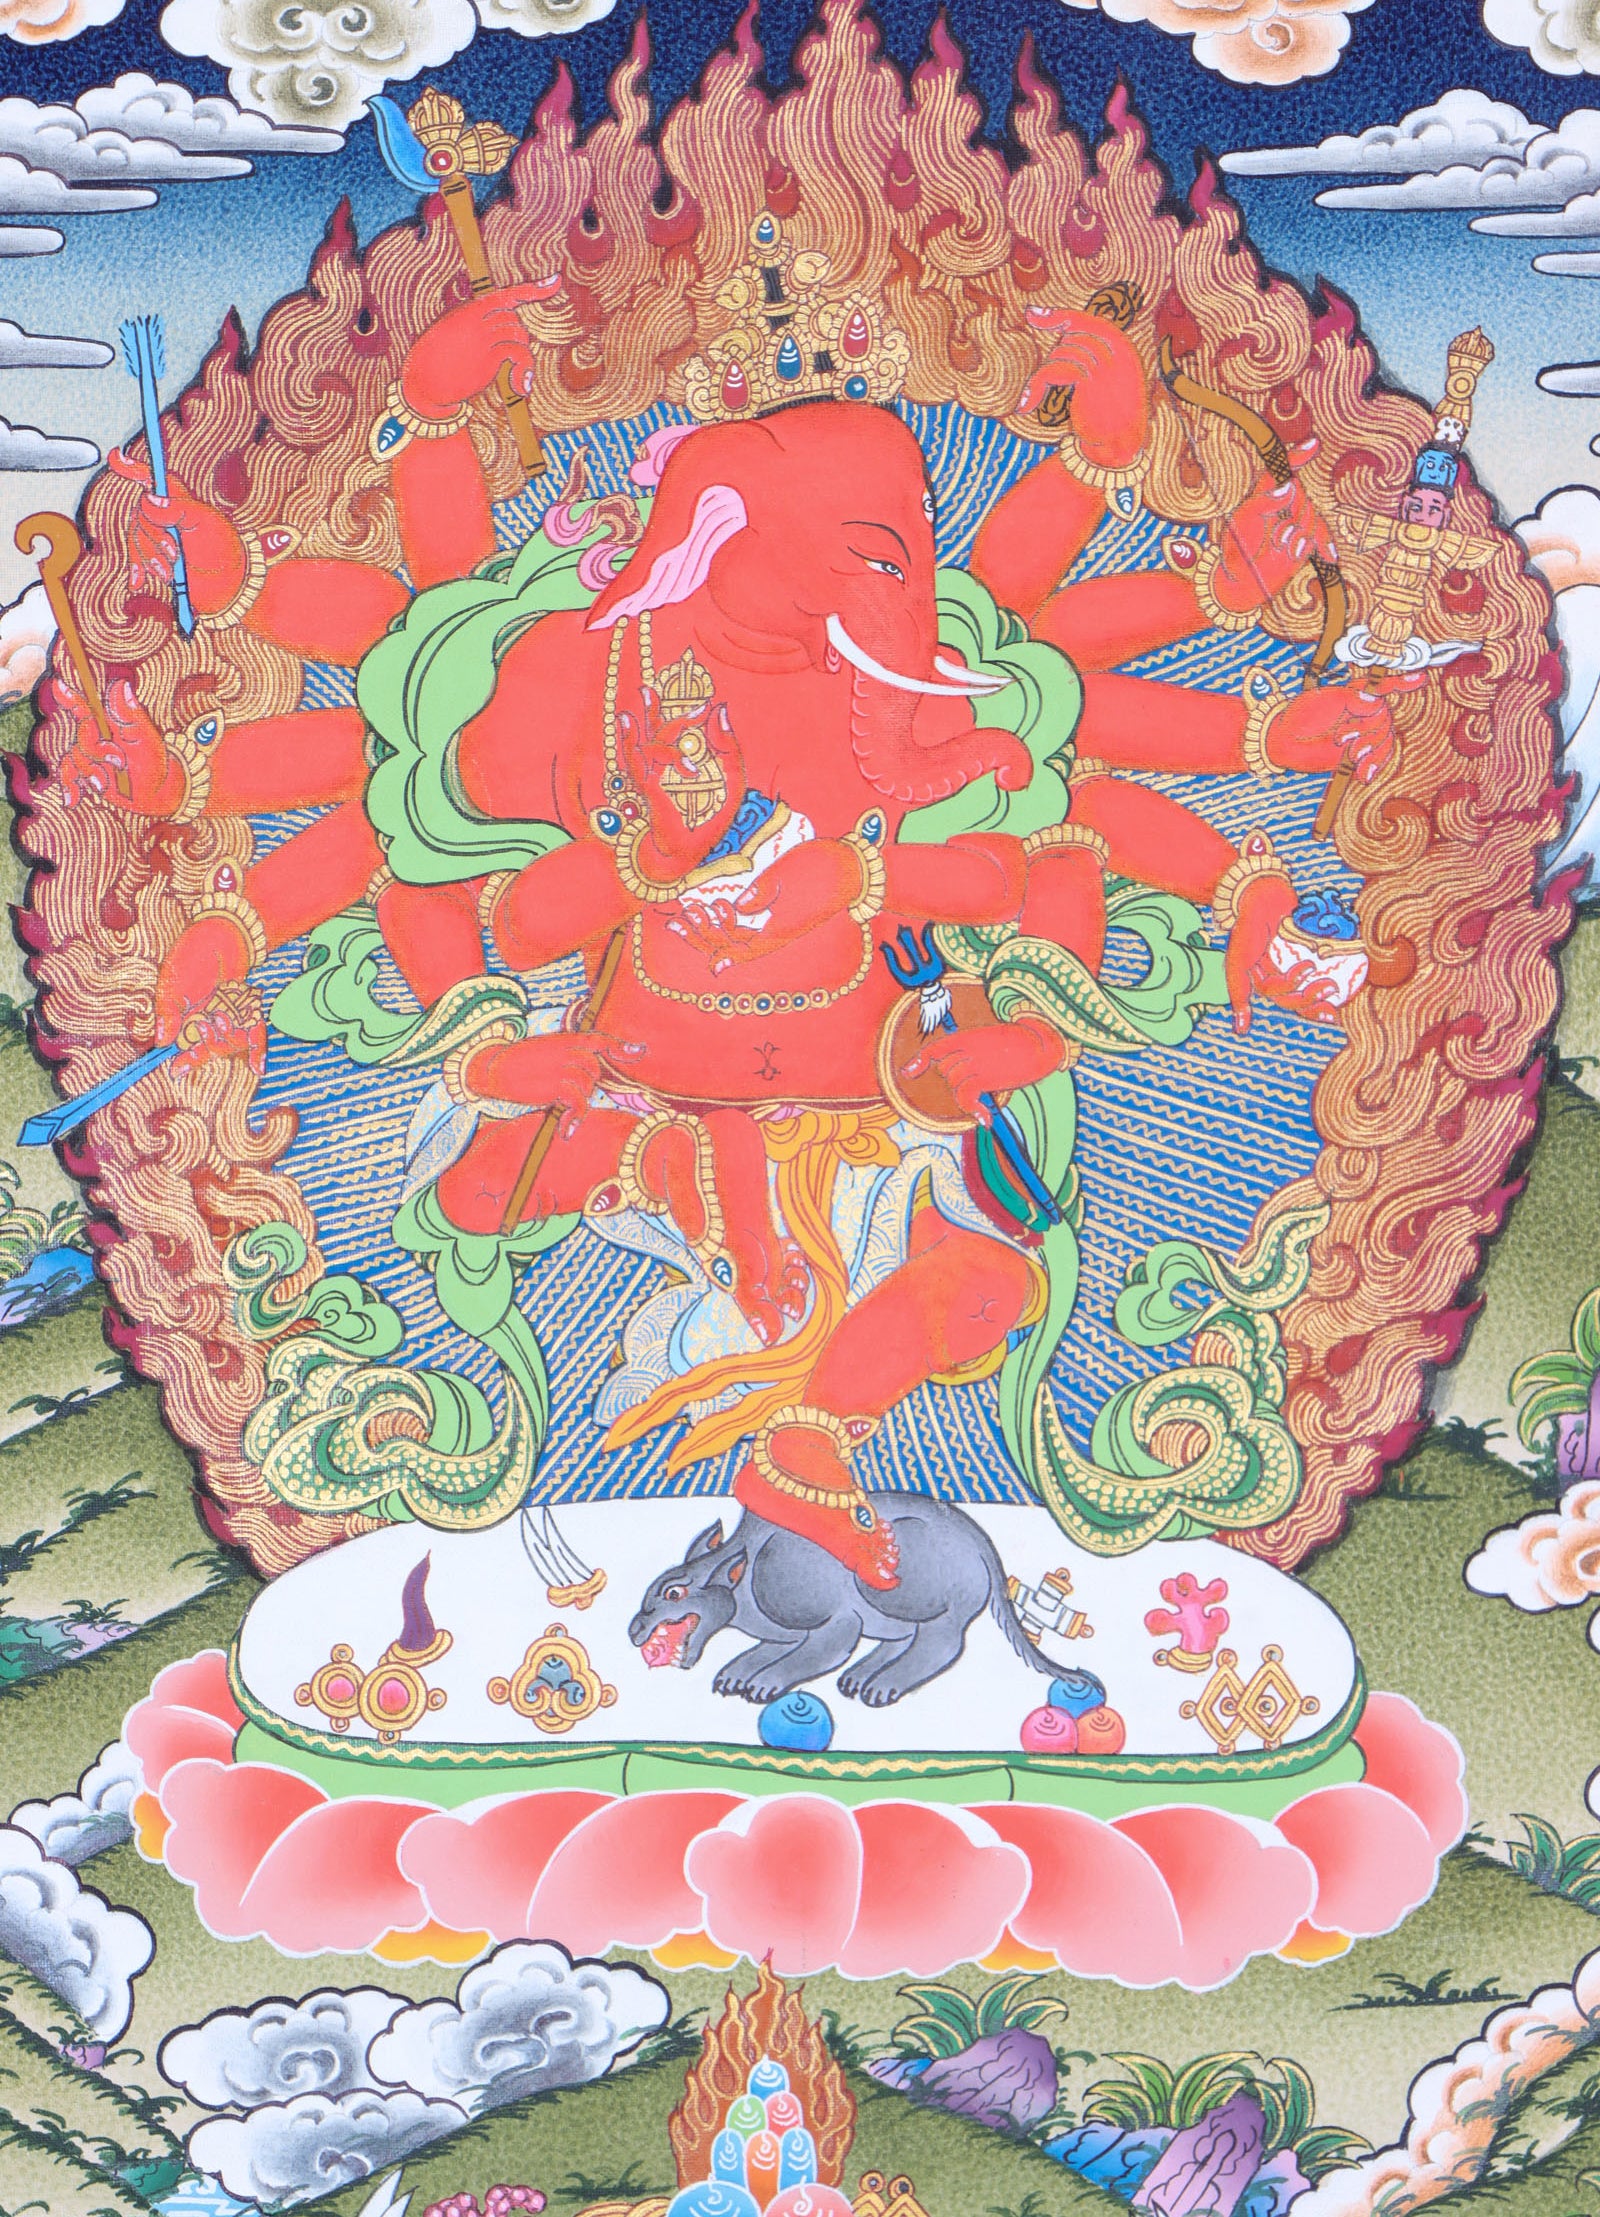 The Red Ganesh Thangka aids devotees to connect with and seek blessings from Lord Ganesh.